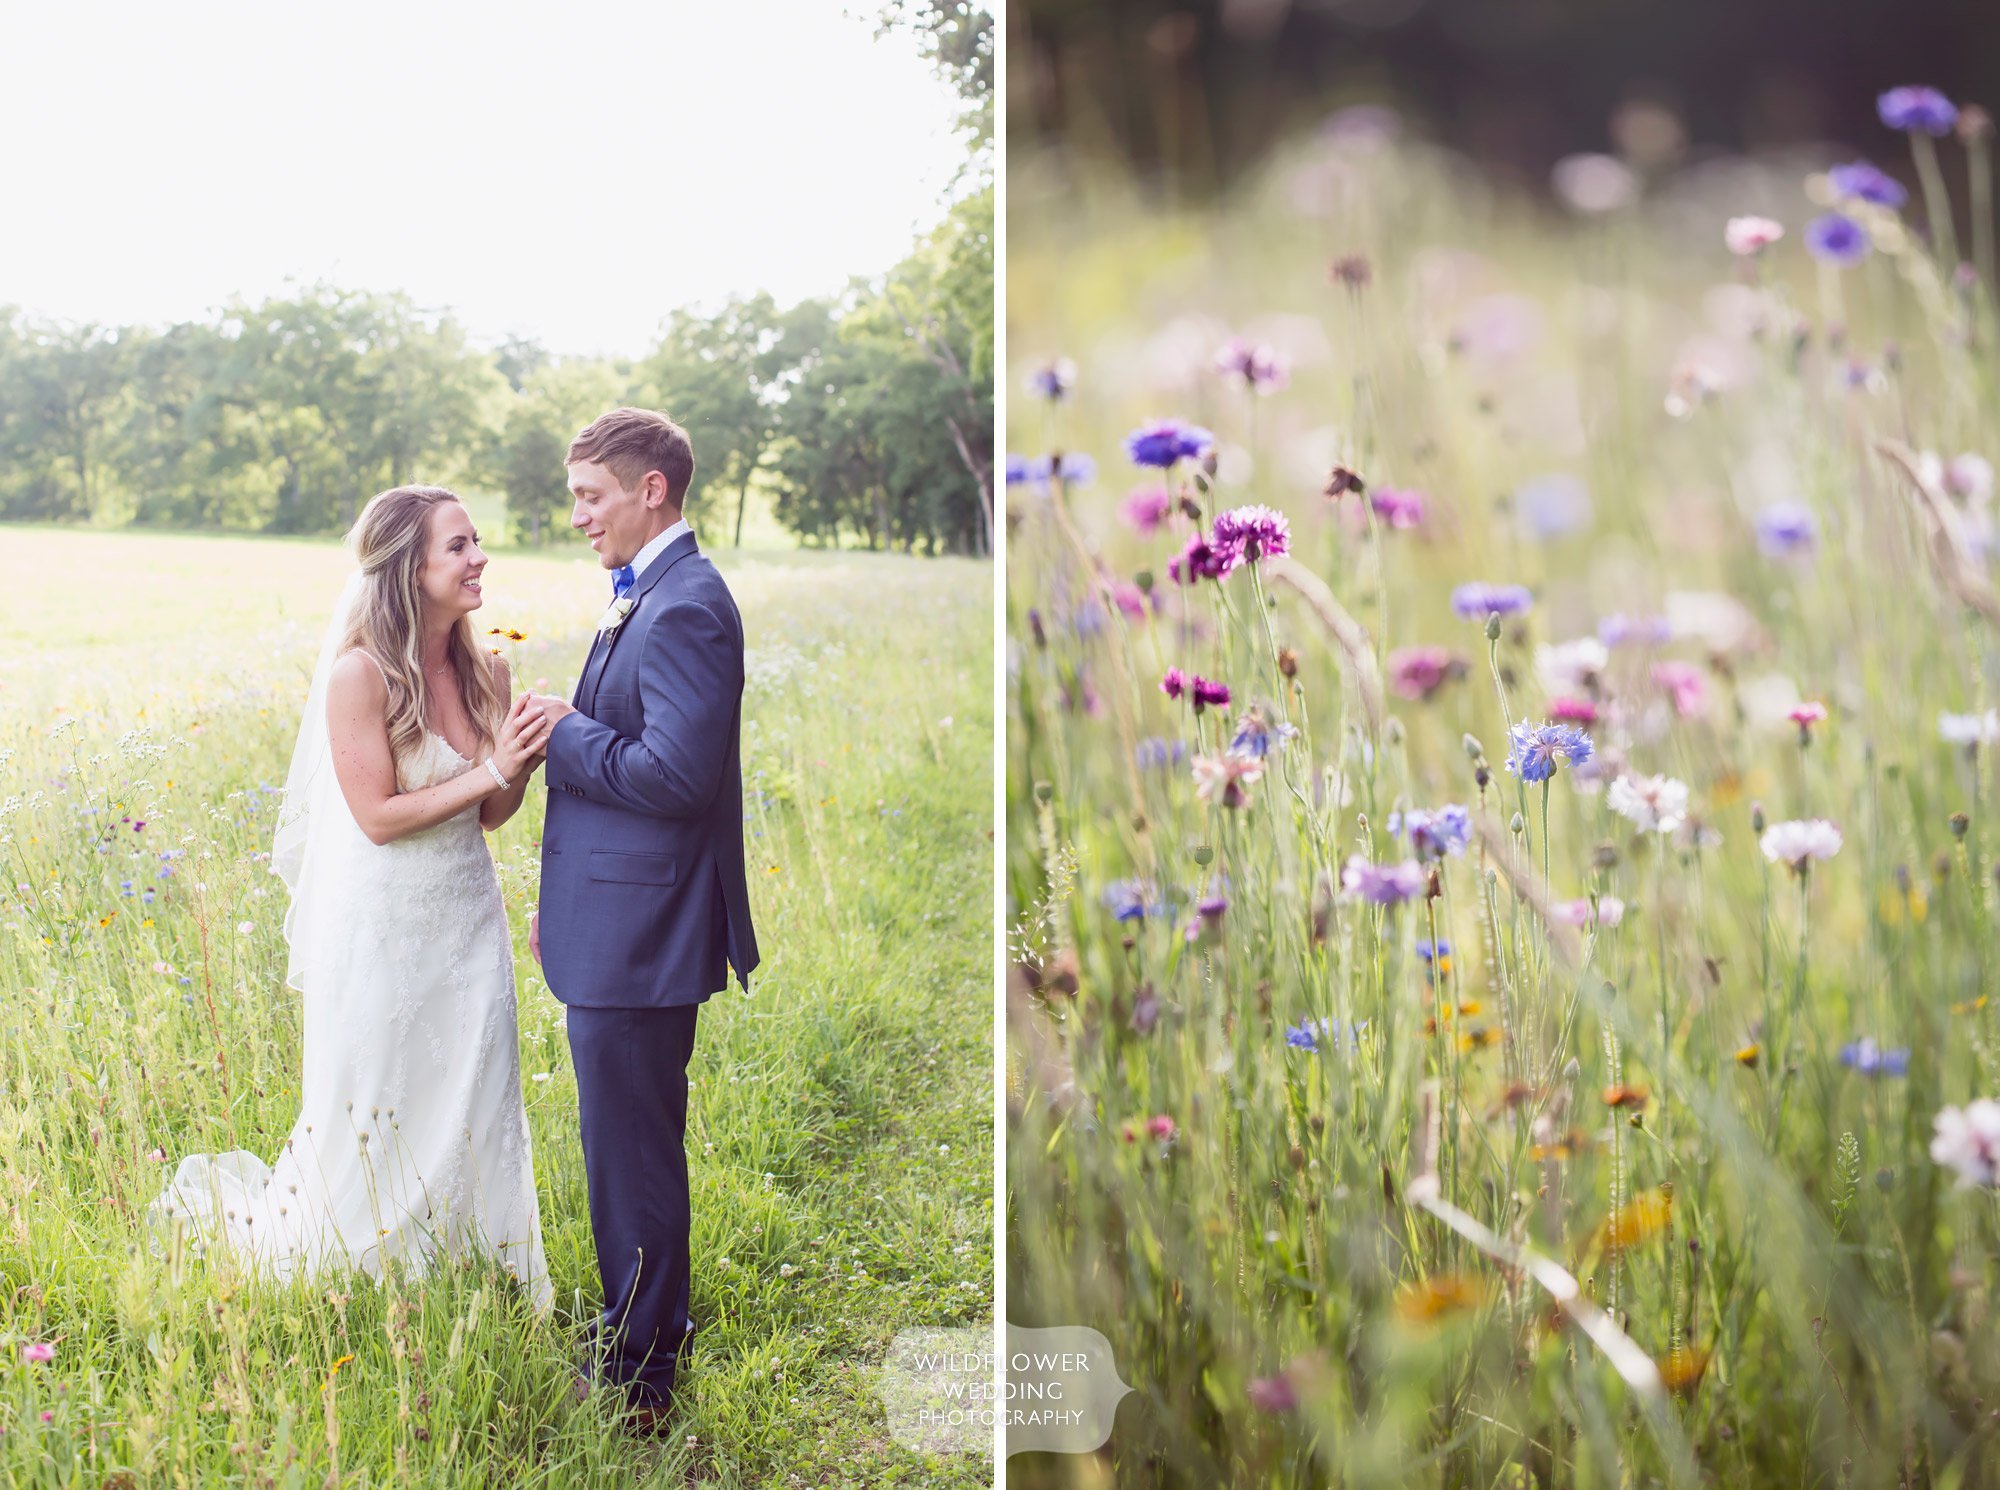 Loved these photos of the bride and groom standing in a field of wildflowers behind the barn at Kempker's in Westphalia.